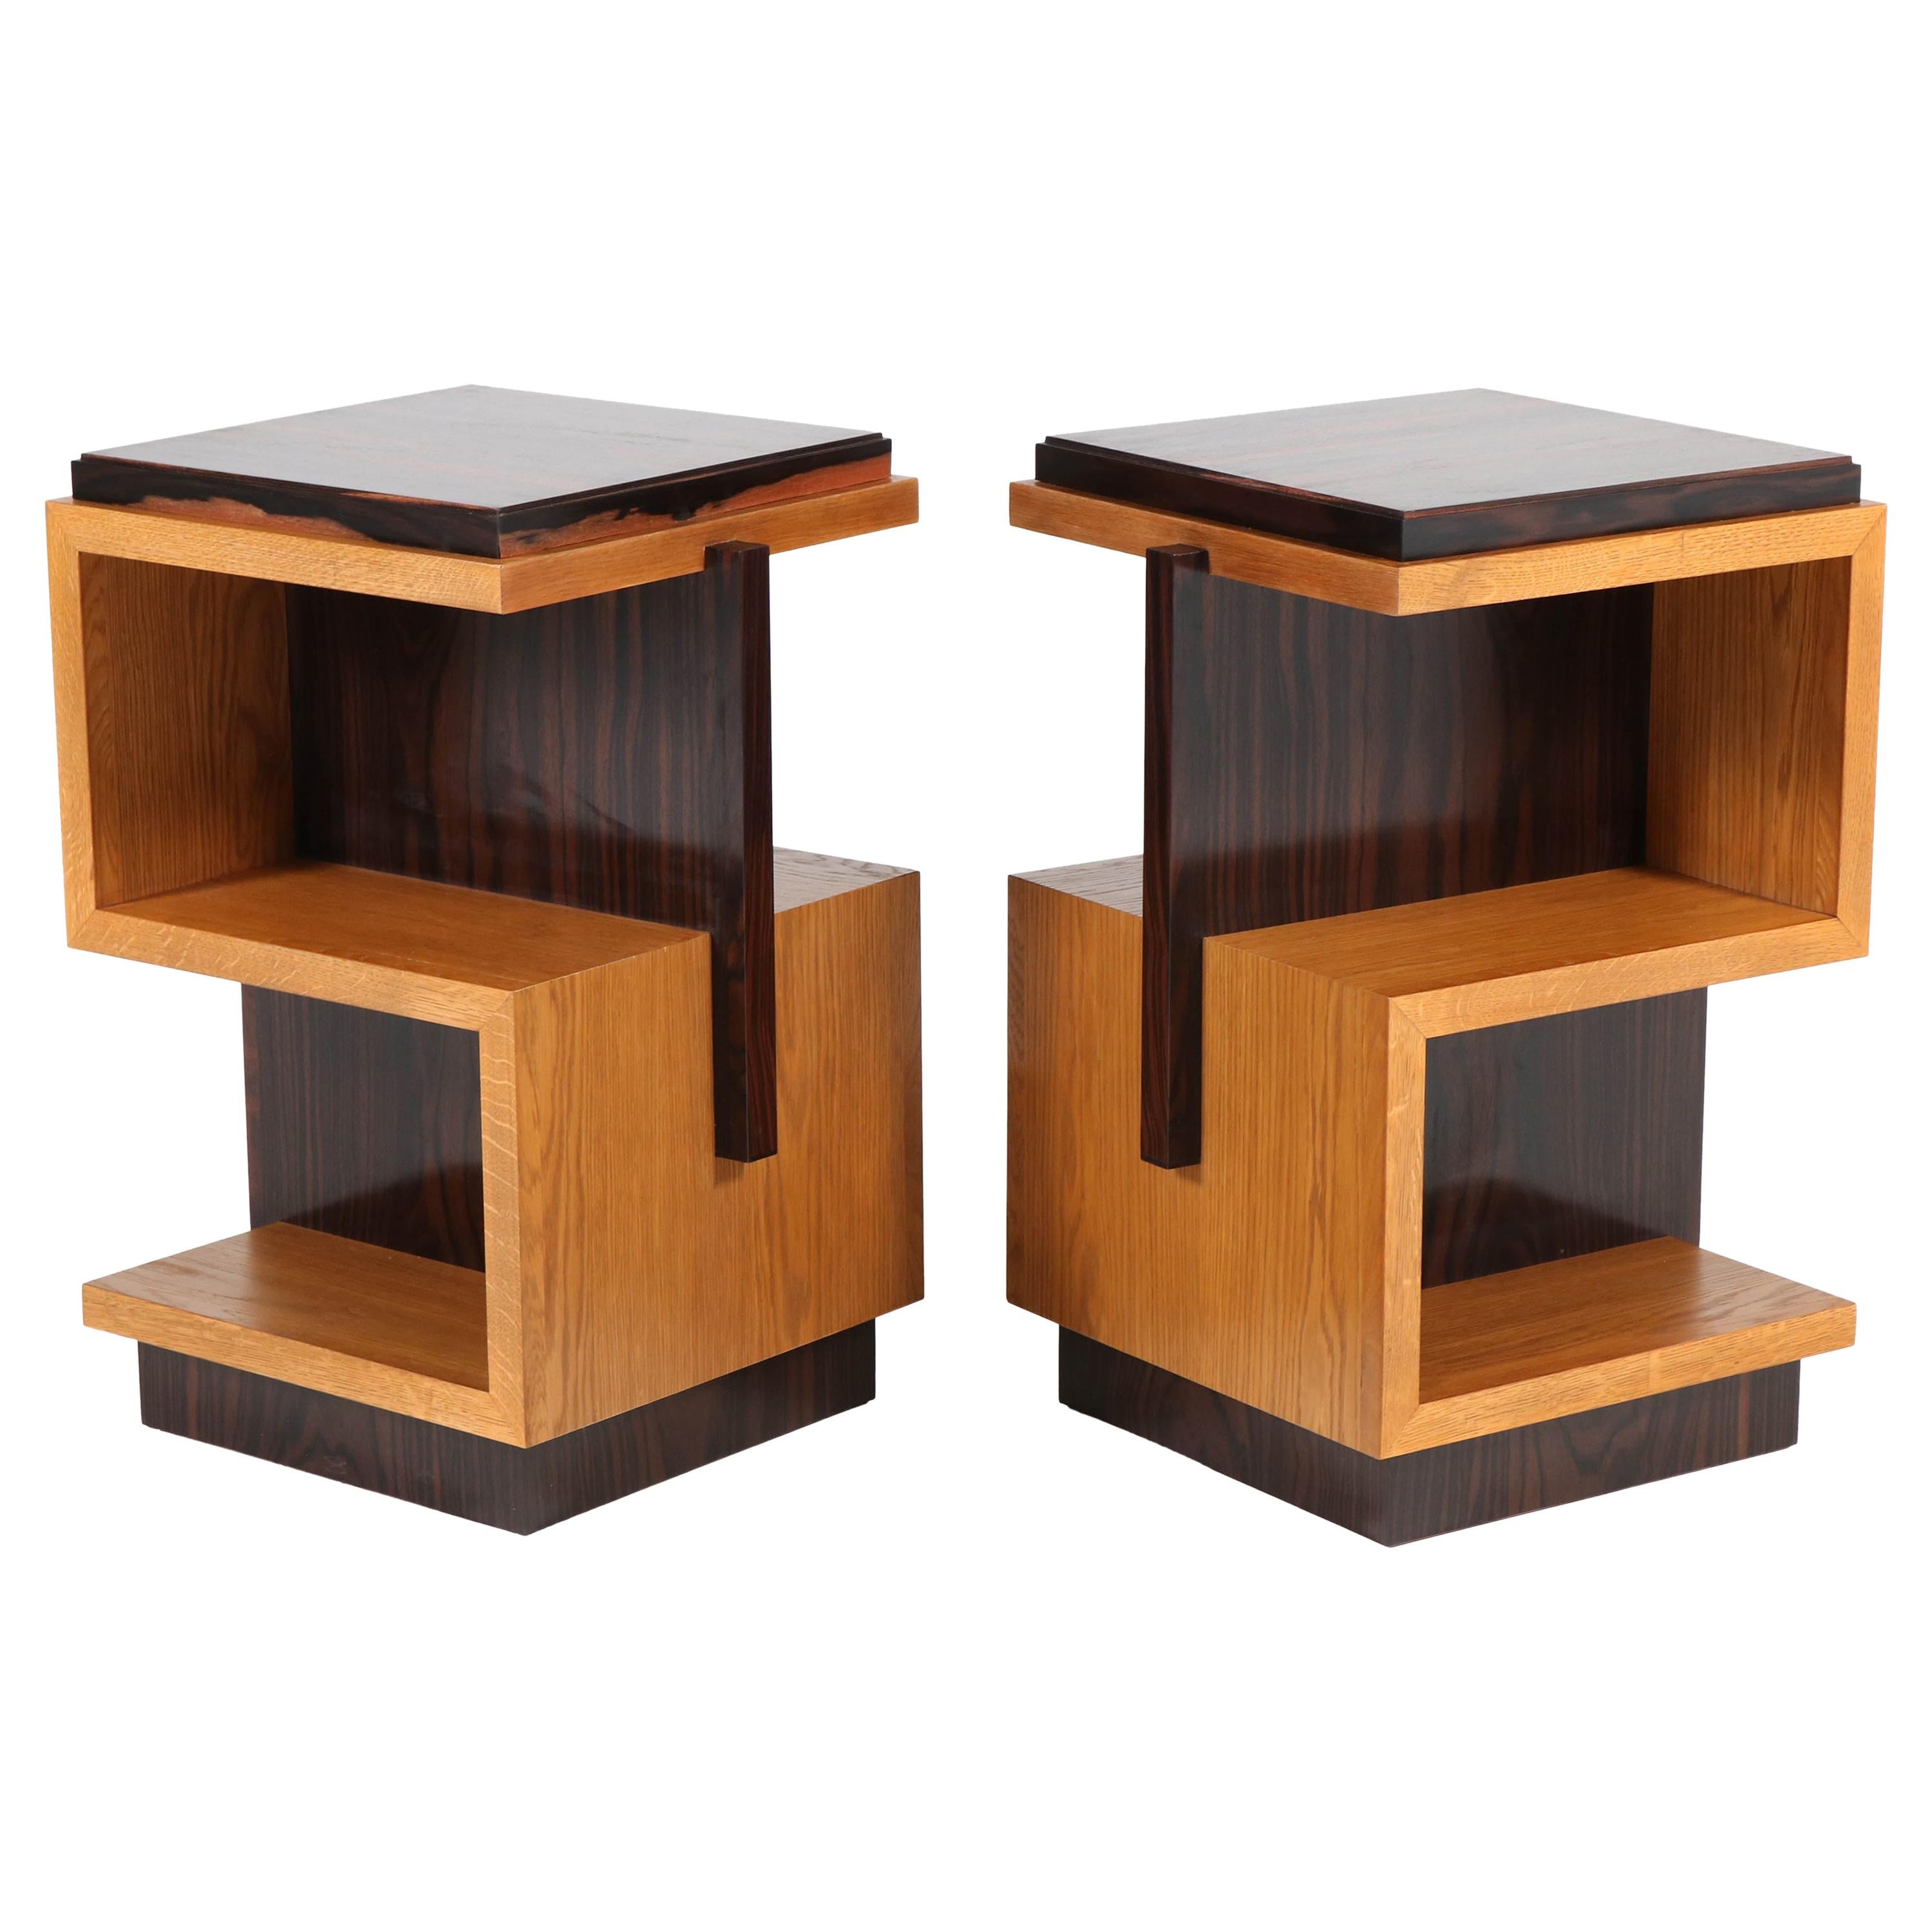 Pair of Art Deco Style Haagse School Style Side Tables, 2020